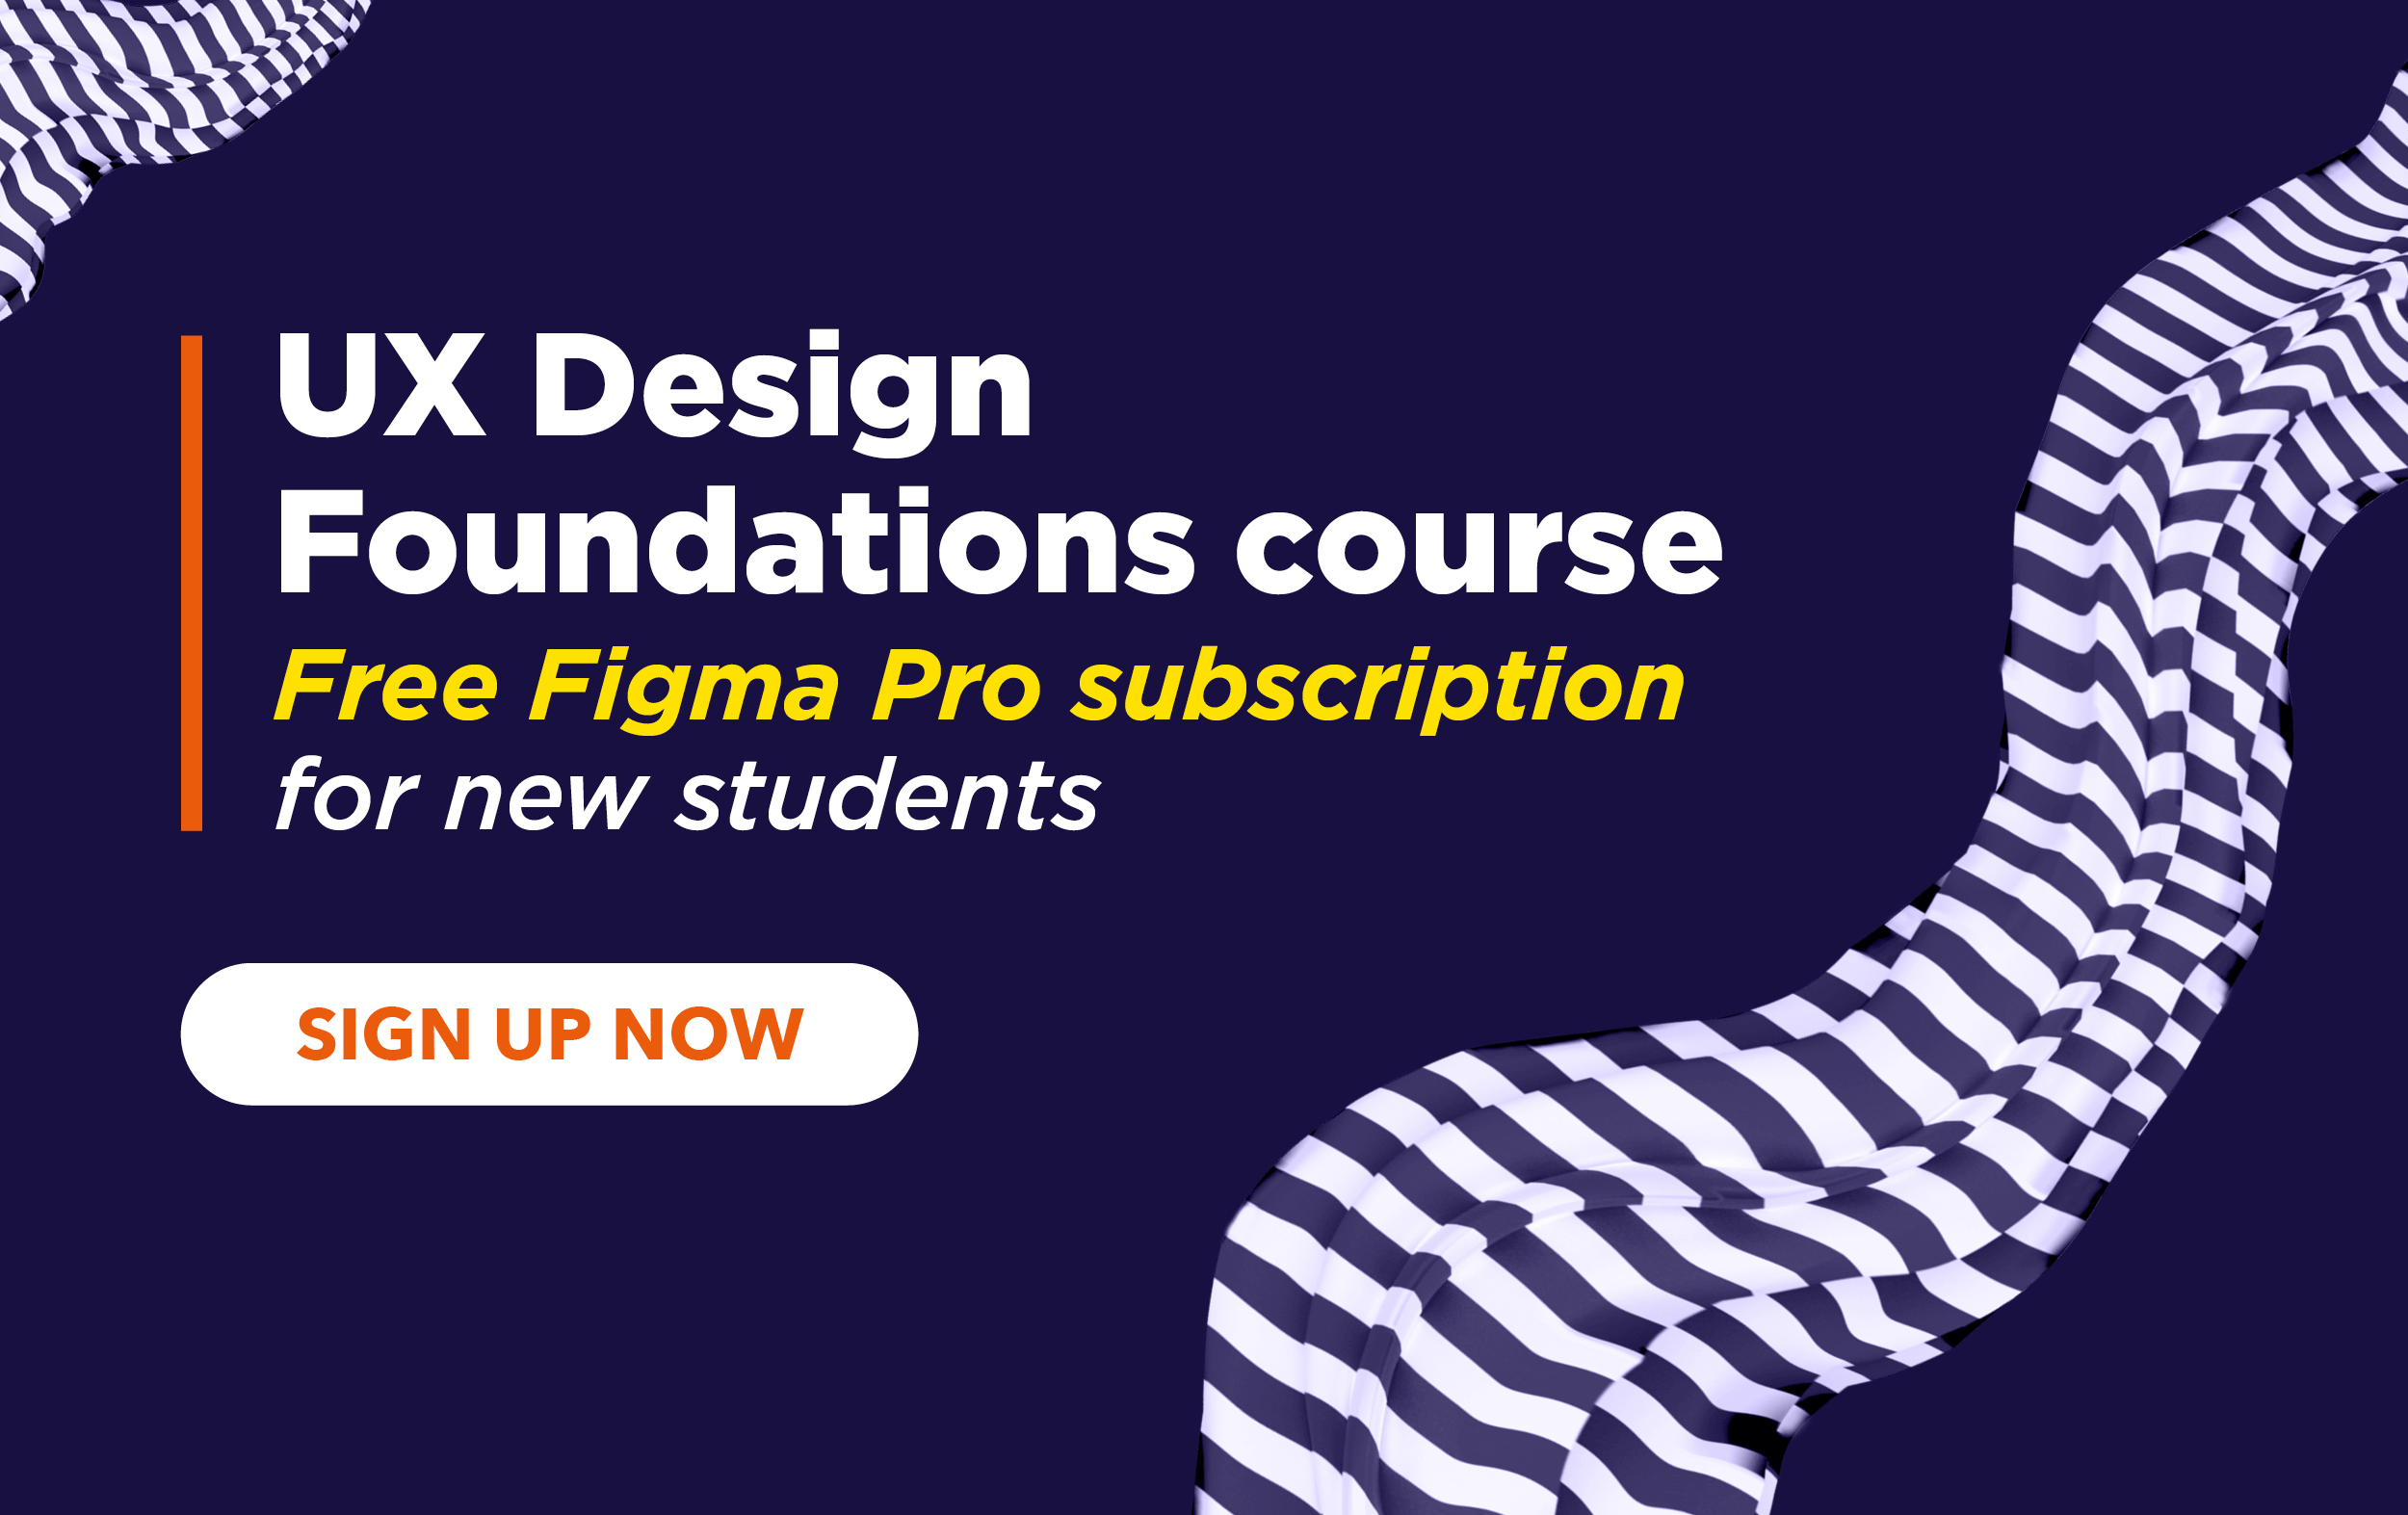 Ux Design Foundations course, free Figma Pro subscription for new students with a flashing button that says sign up now, on a blue background